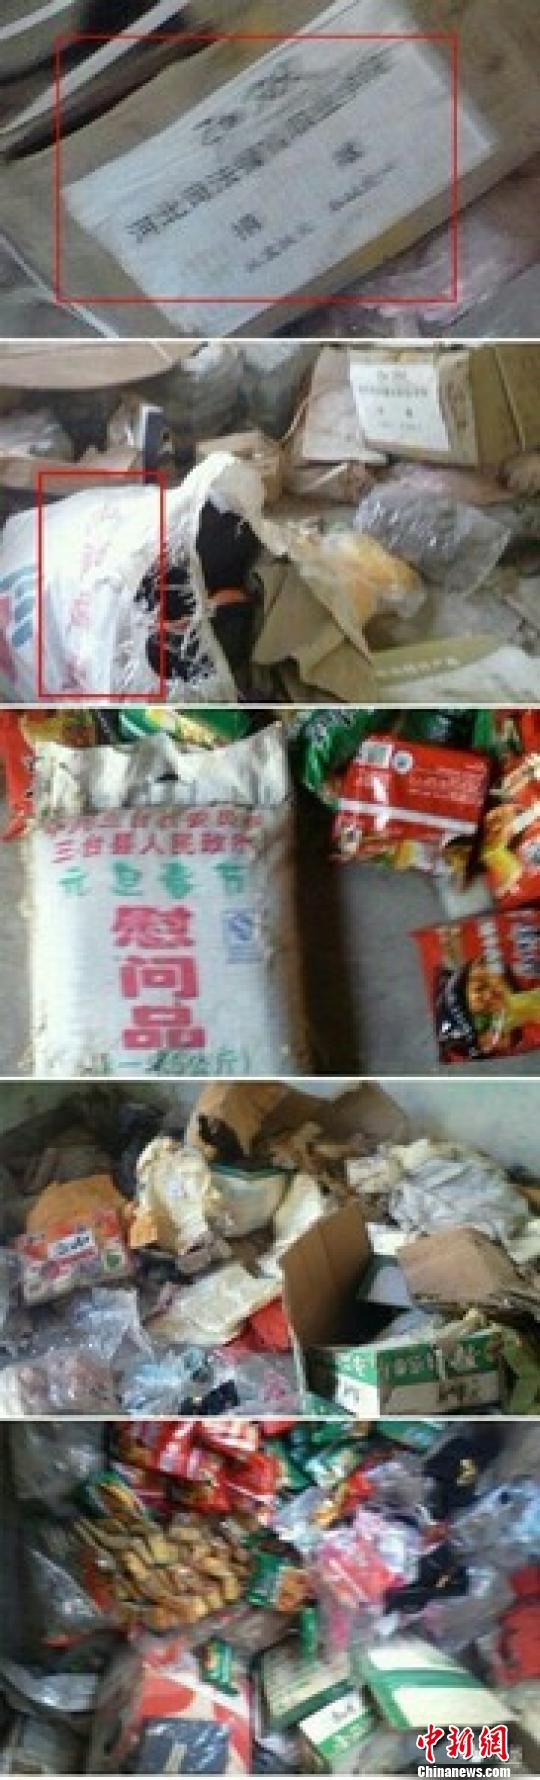 Expired instant noodles, bread, bottled water, rice and tattered clothes, all covered in mold. [Photo: chinanews.com]